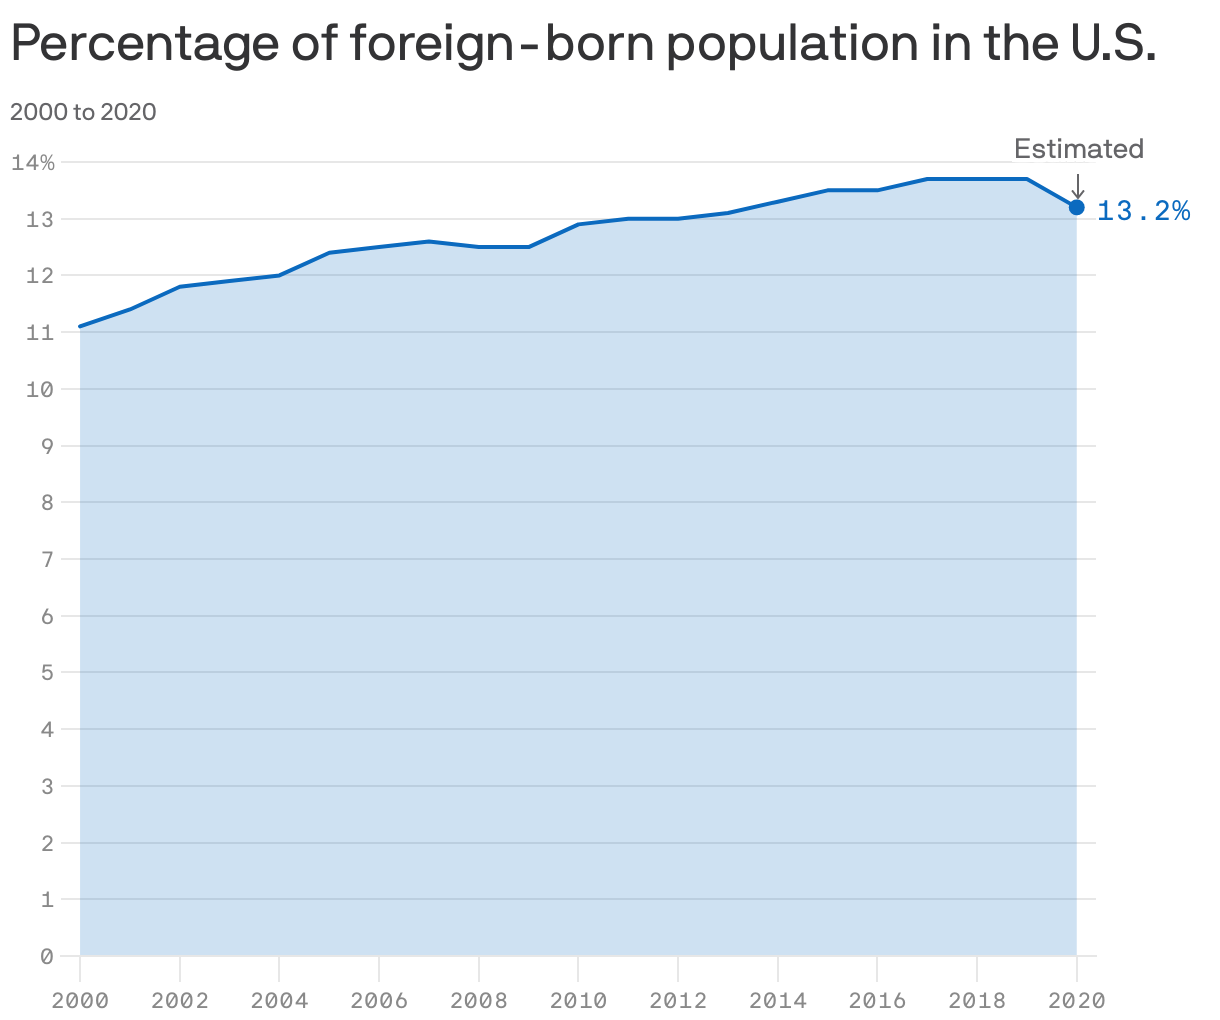 Percentage of foreign-born population in the U.S.